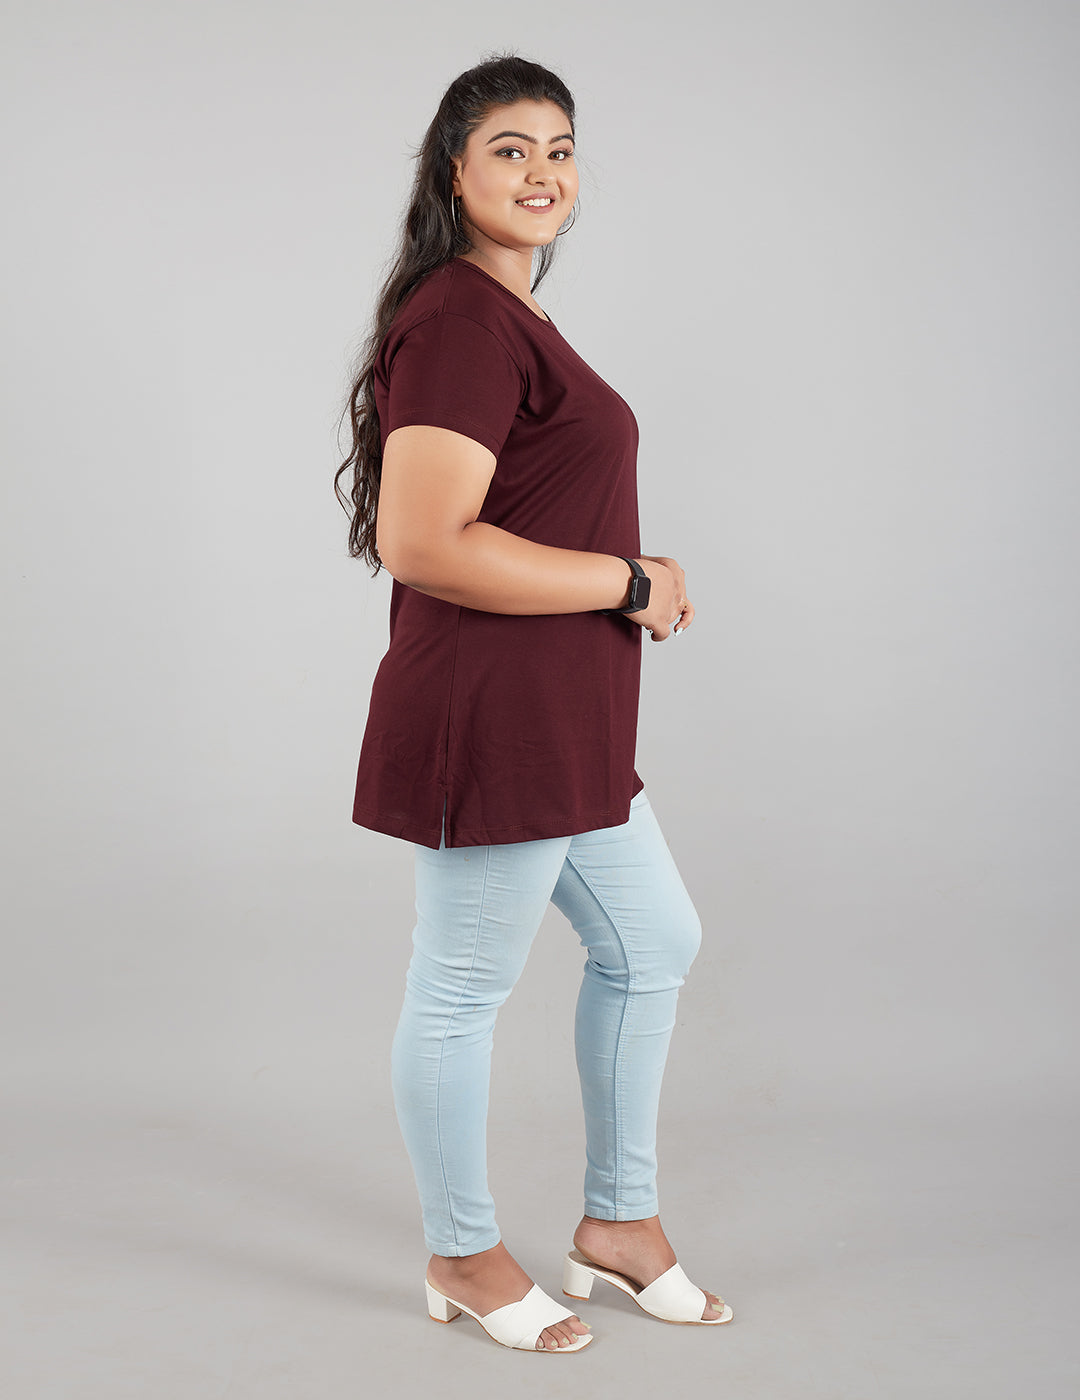 Comfortable Plus Size Long T-Shirts For Women (Pack Of 2) Online In India